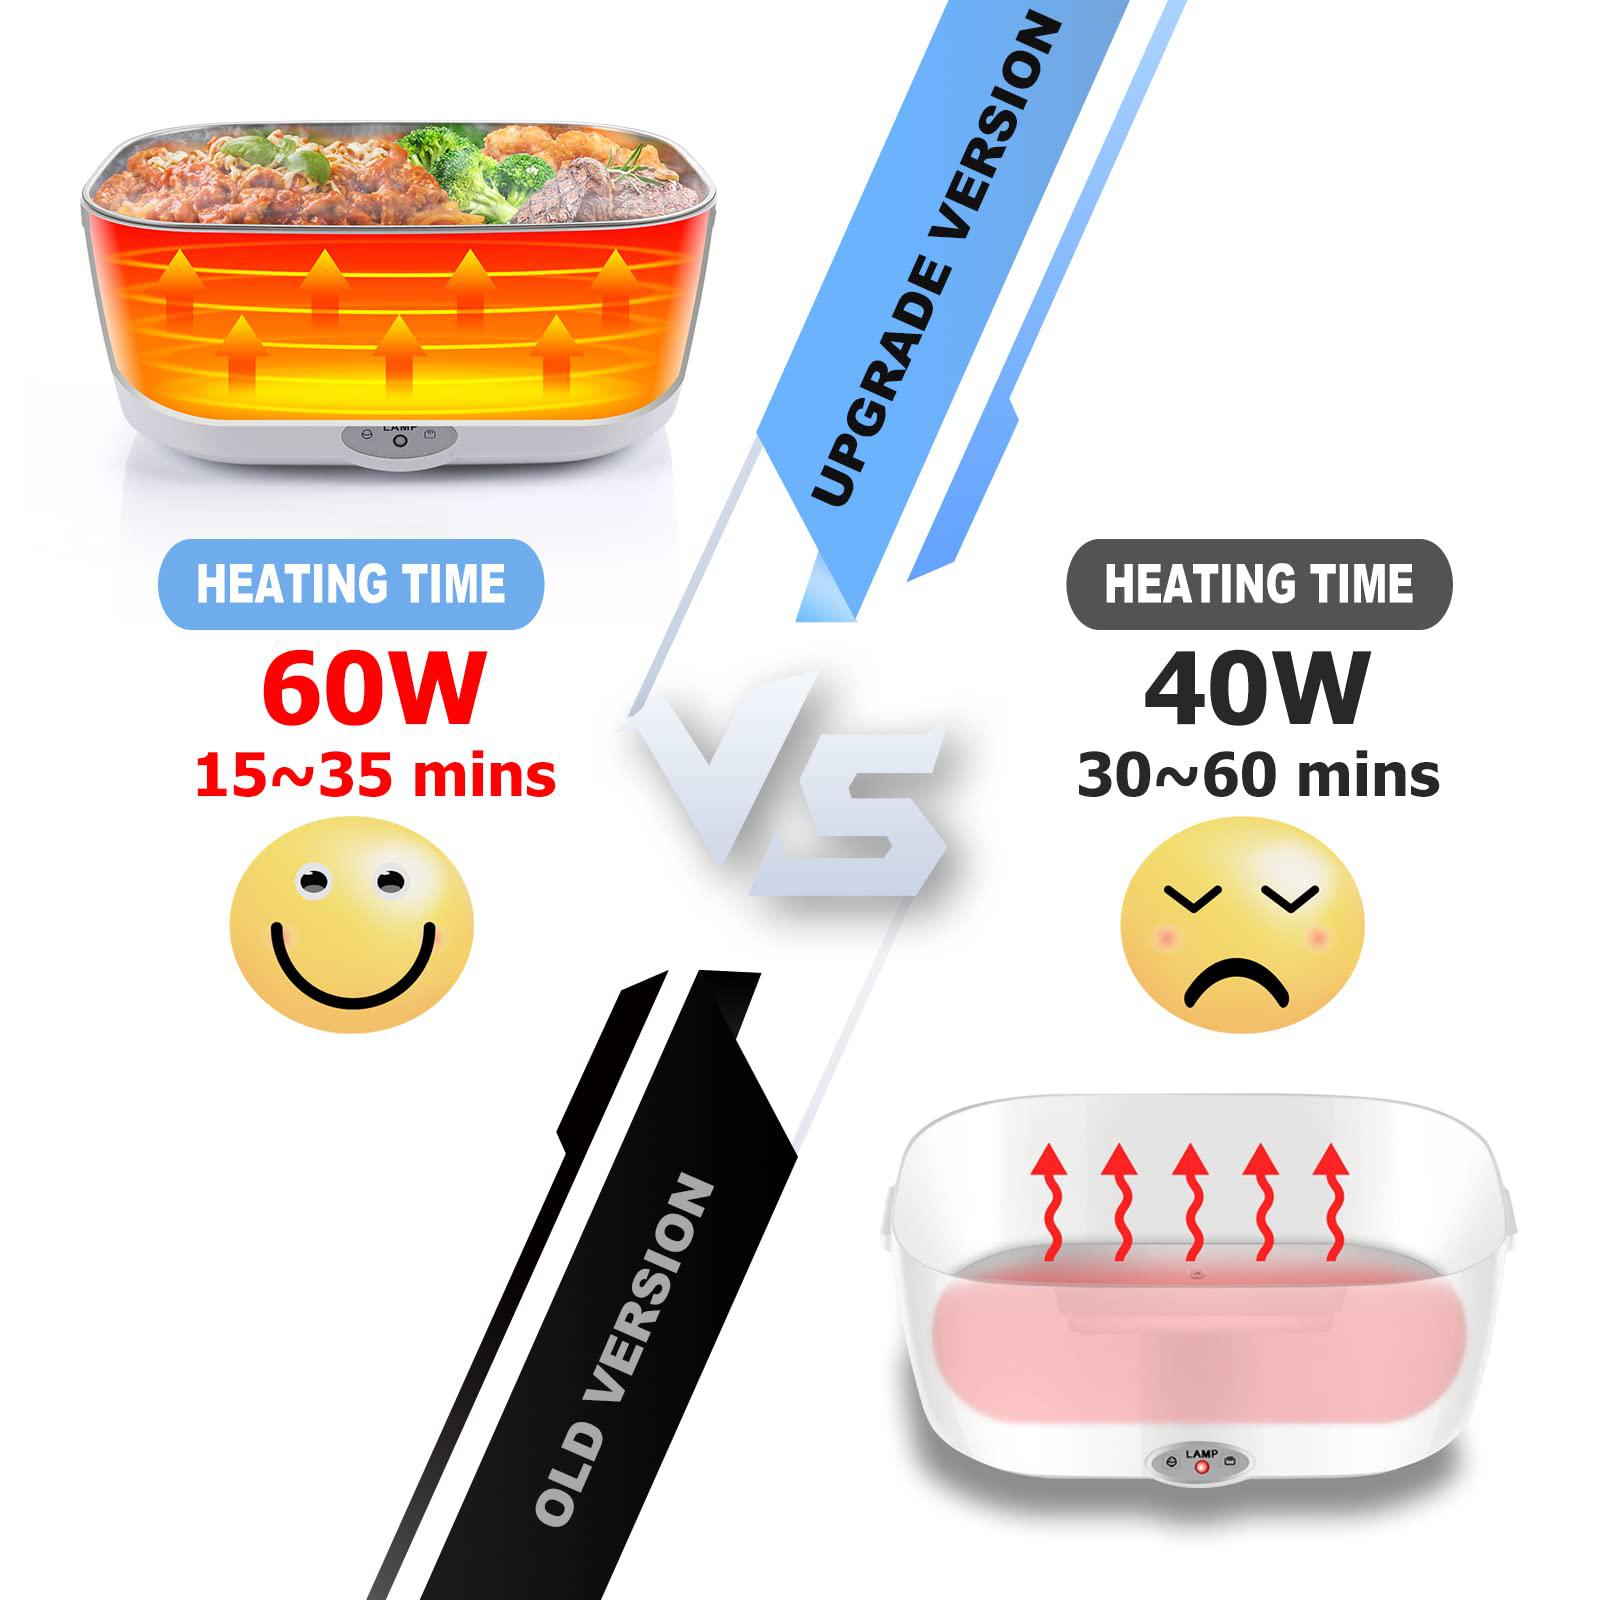 AsFrost electric lunch box for car and home work, 12v 24v 110v 60w faster portable food warmer heated lunch box for adults, removable